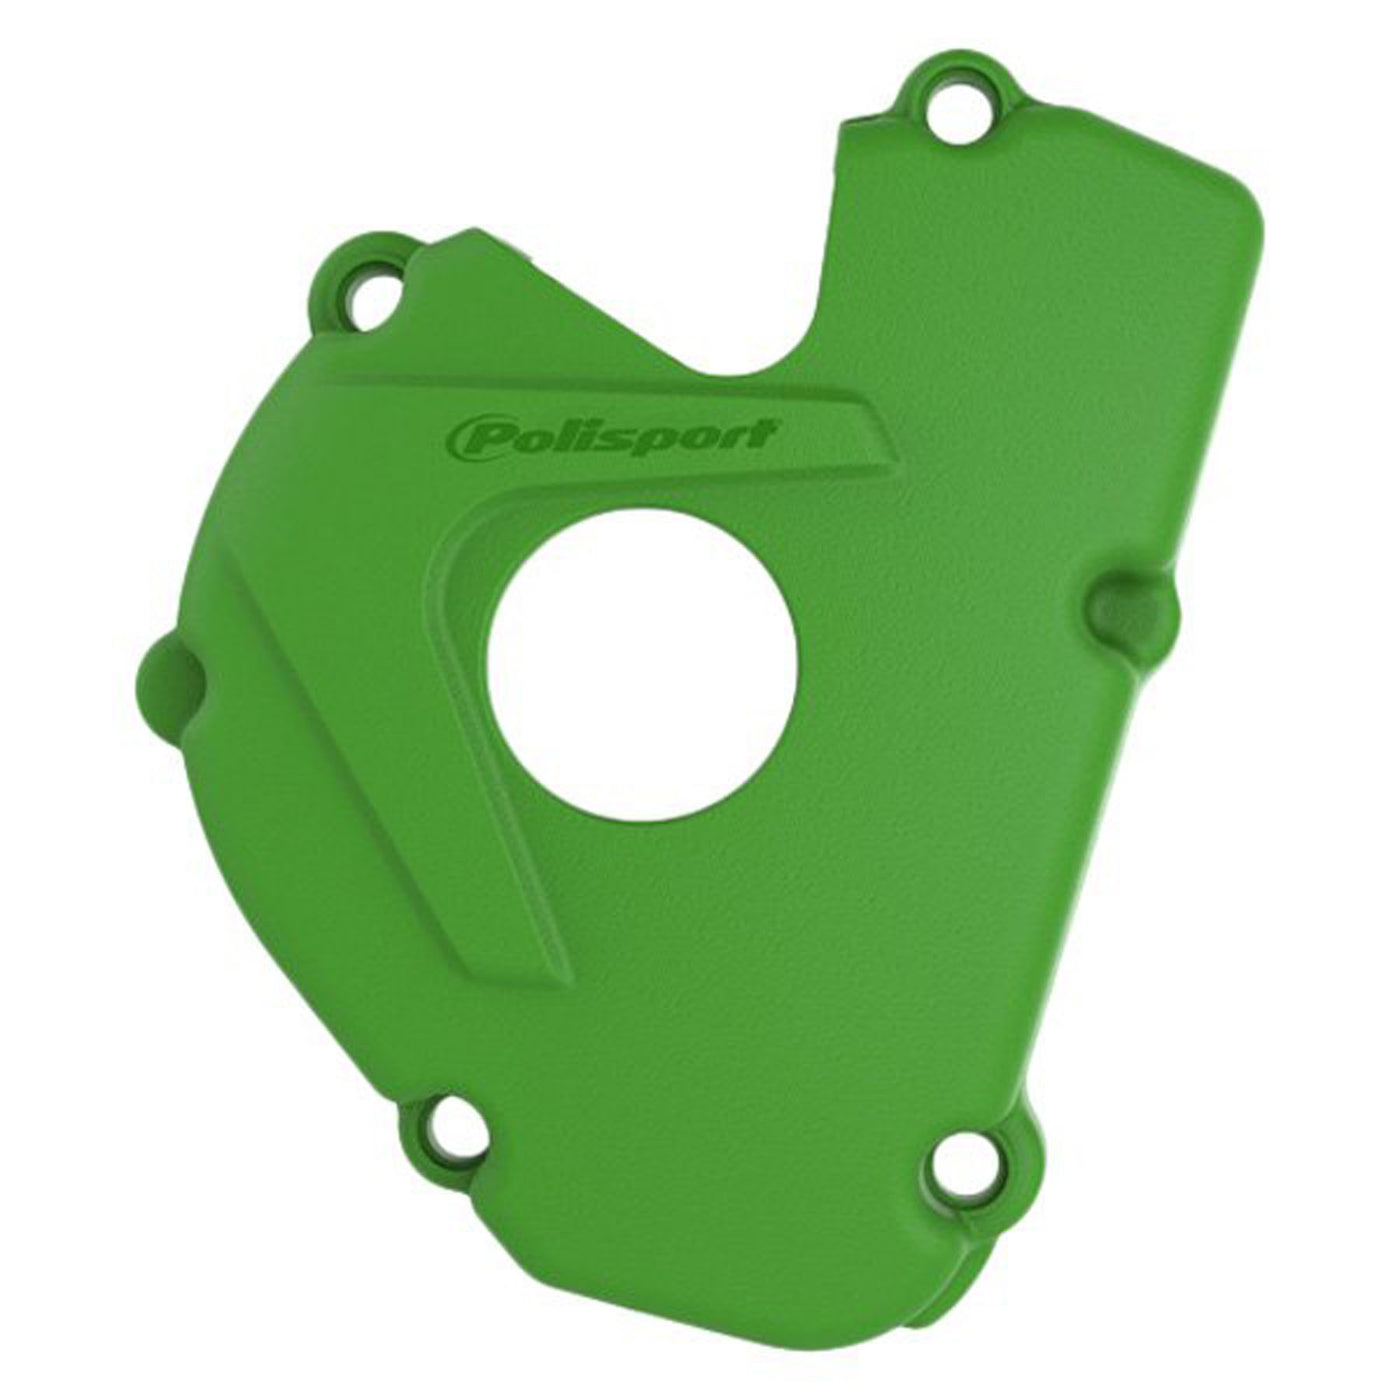 POLISPORT IGNITION COVER PROTECTOR GREEN 05#mpn_8460800002